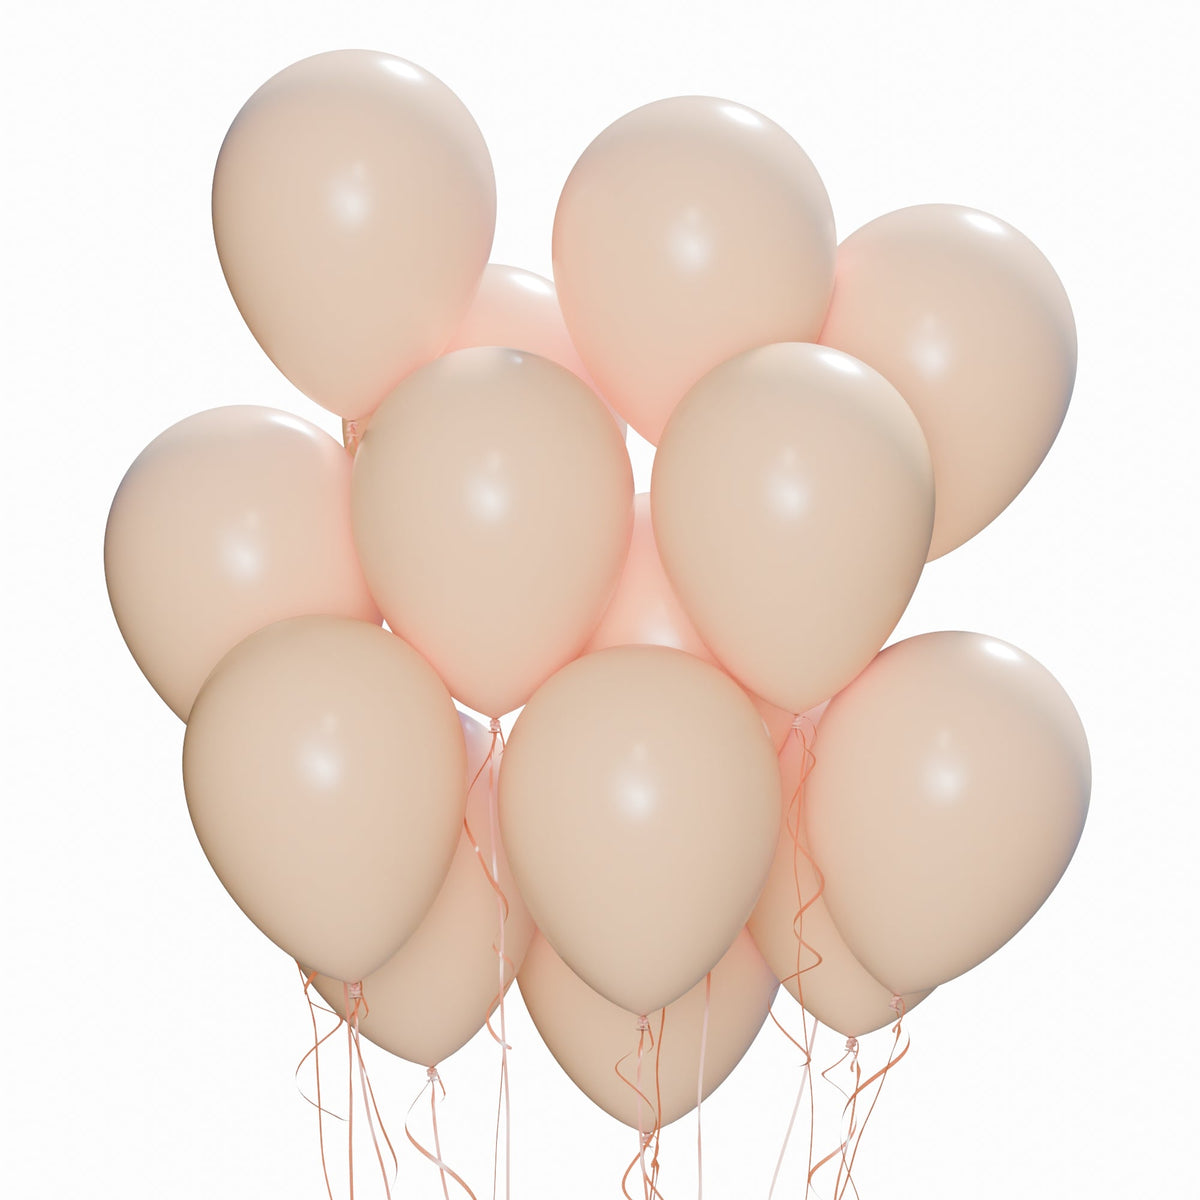 WIDE OCEAN INTERNATIONAL TRADE BEIJING CO., LTD Balloons Blush Nude Latex Balloon 12 inches, 15 Count 810077652688